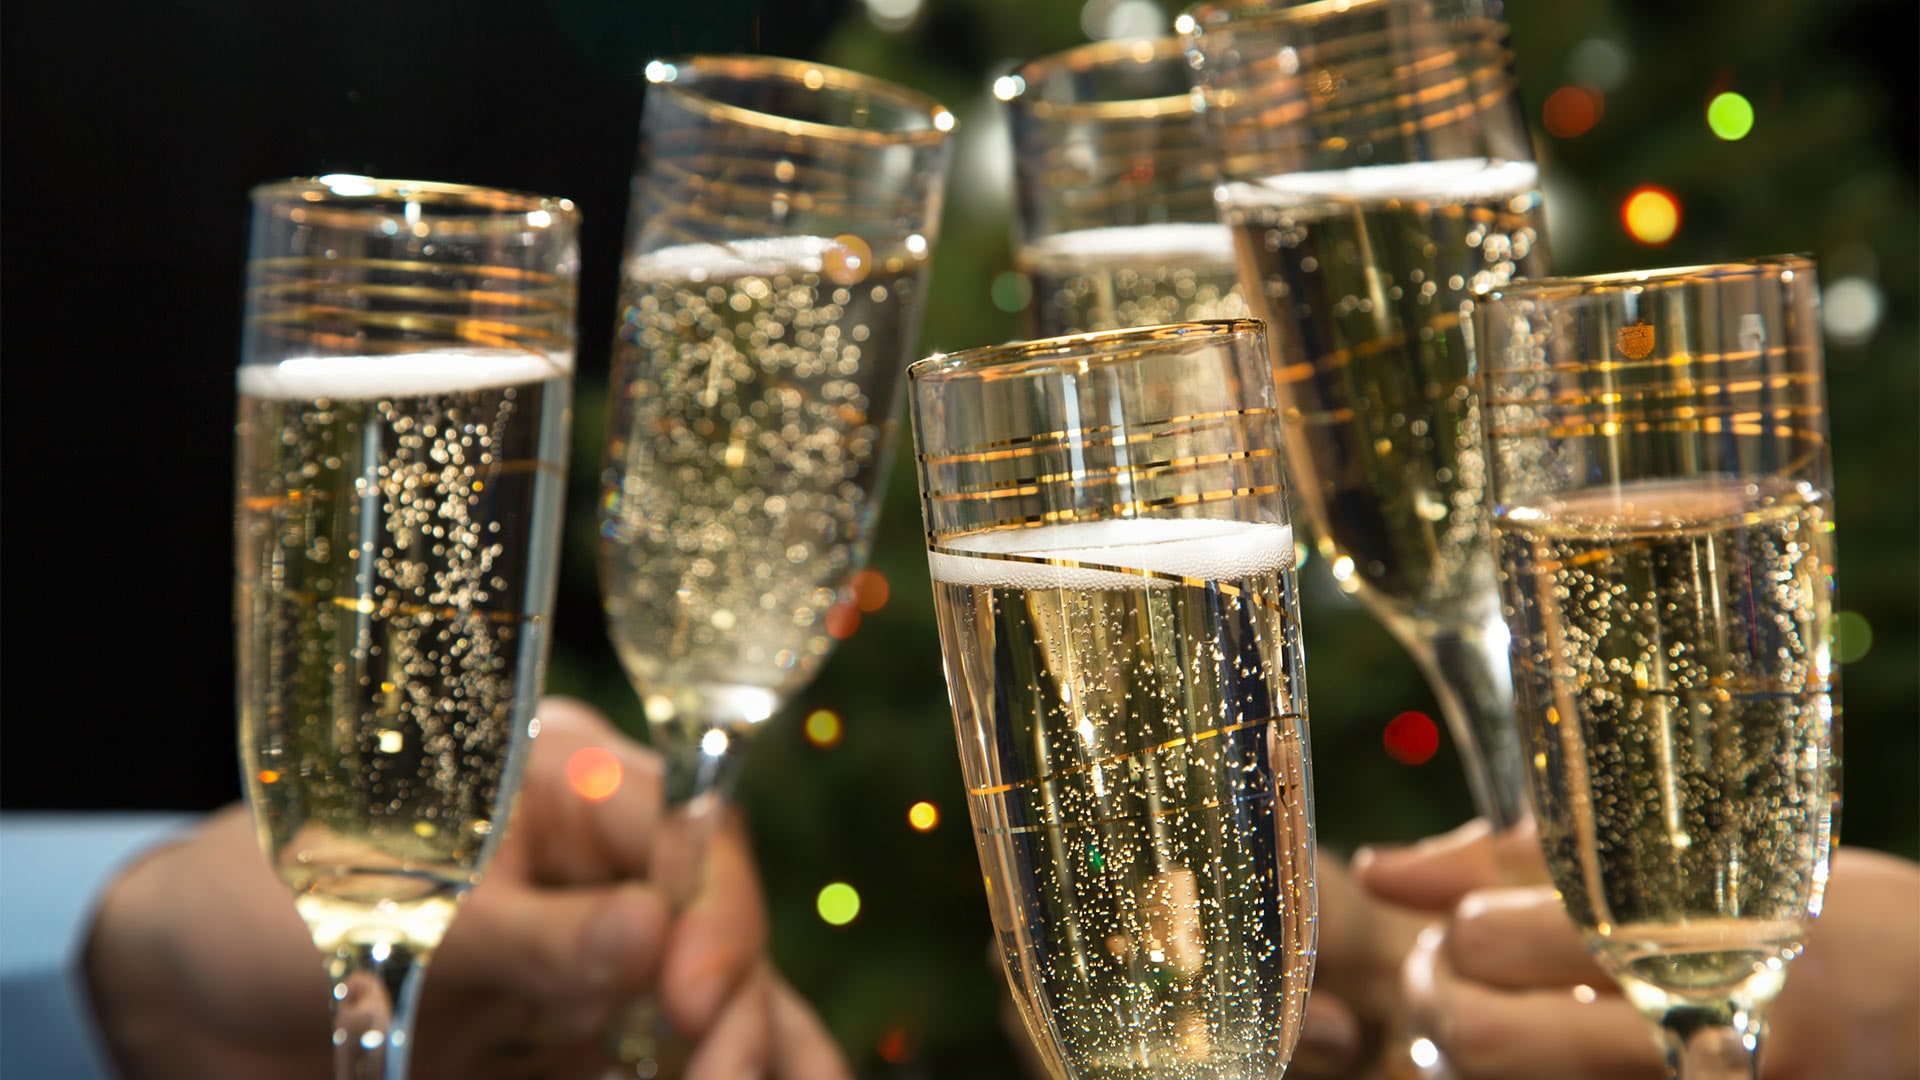 4 champagne glasses to celebrate a special occasion, with gifts chosen from Marina Bay Sands